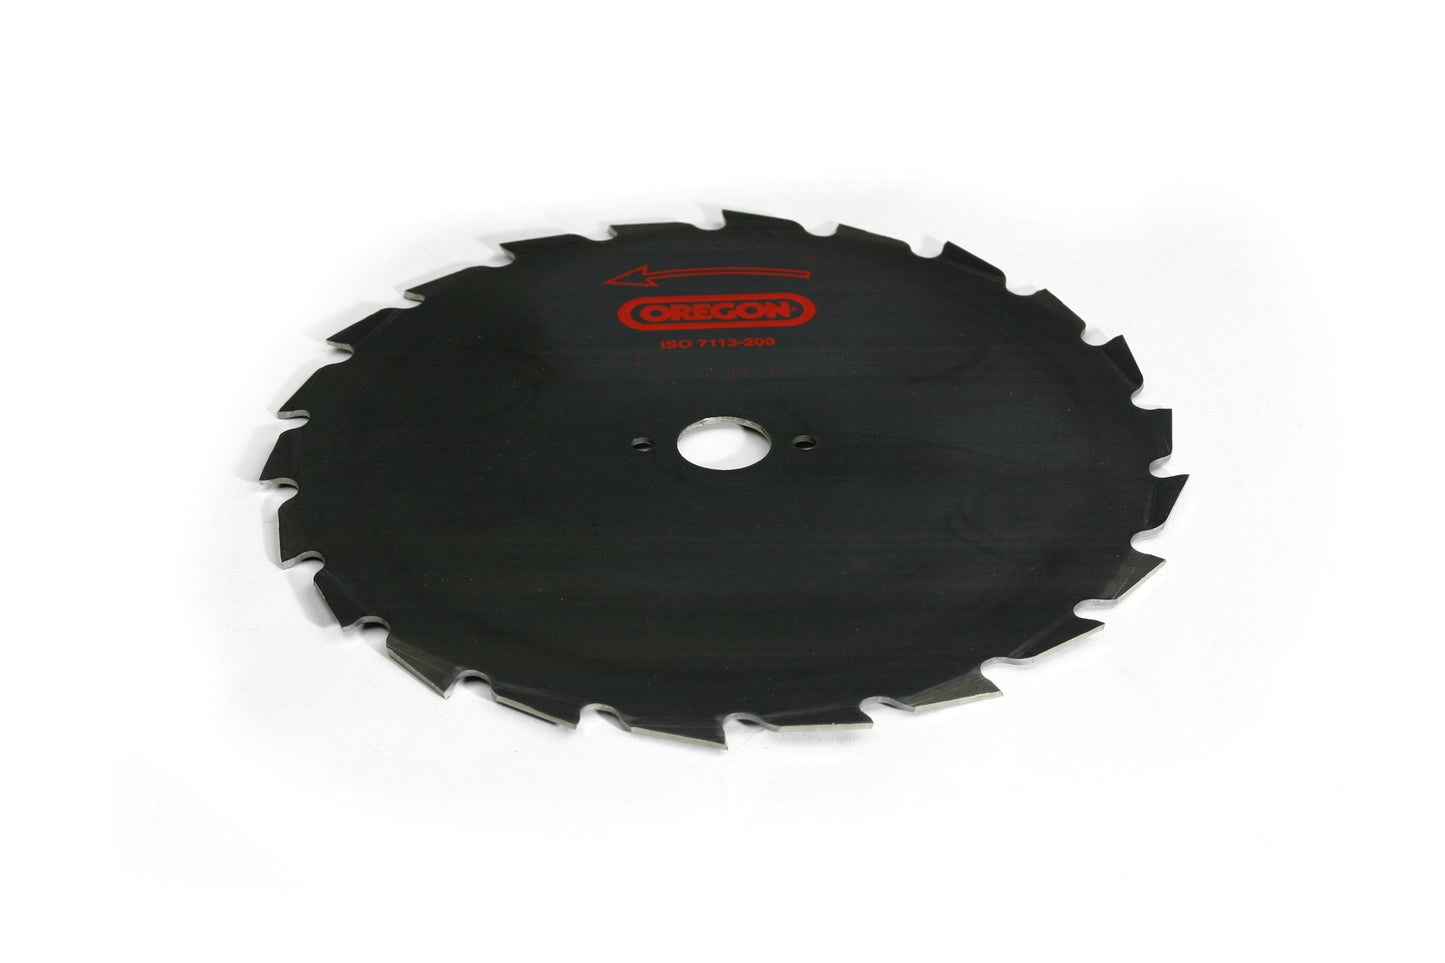 Oregon 110973 - Clearing Saw Blade MAXI - 24t x 9" - Special Order